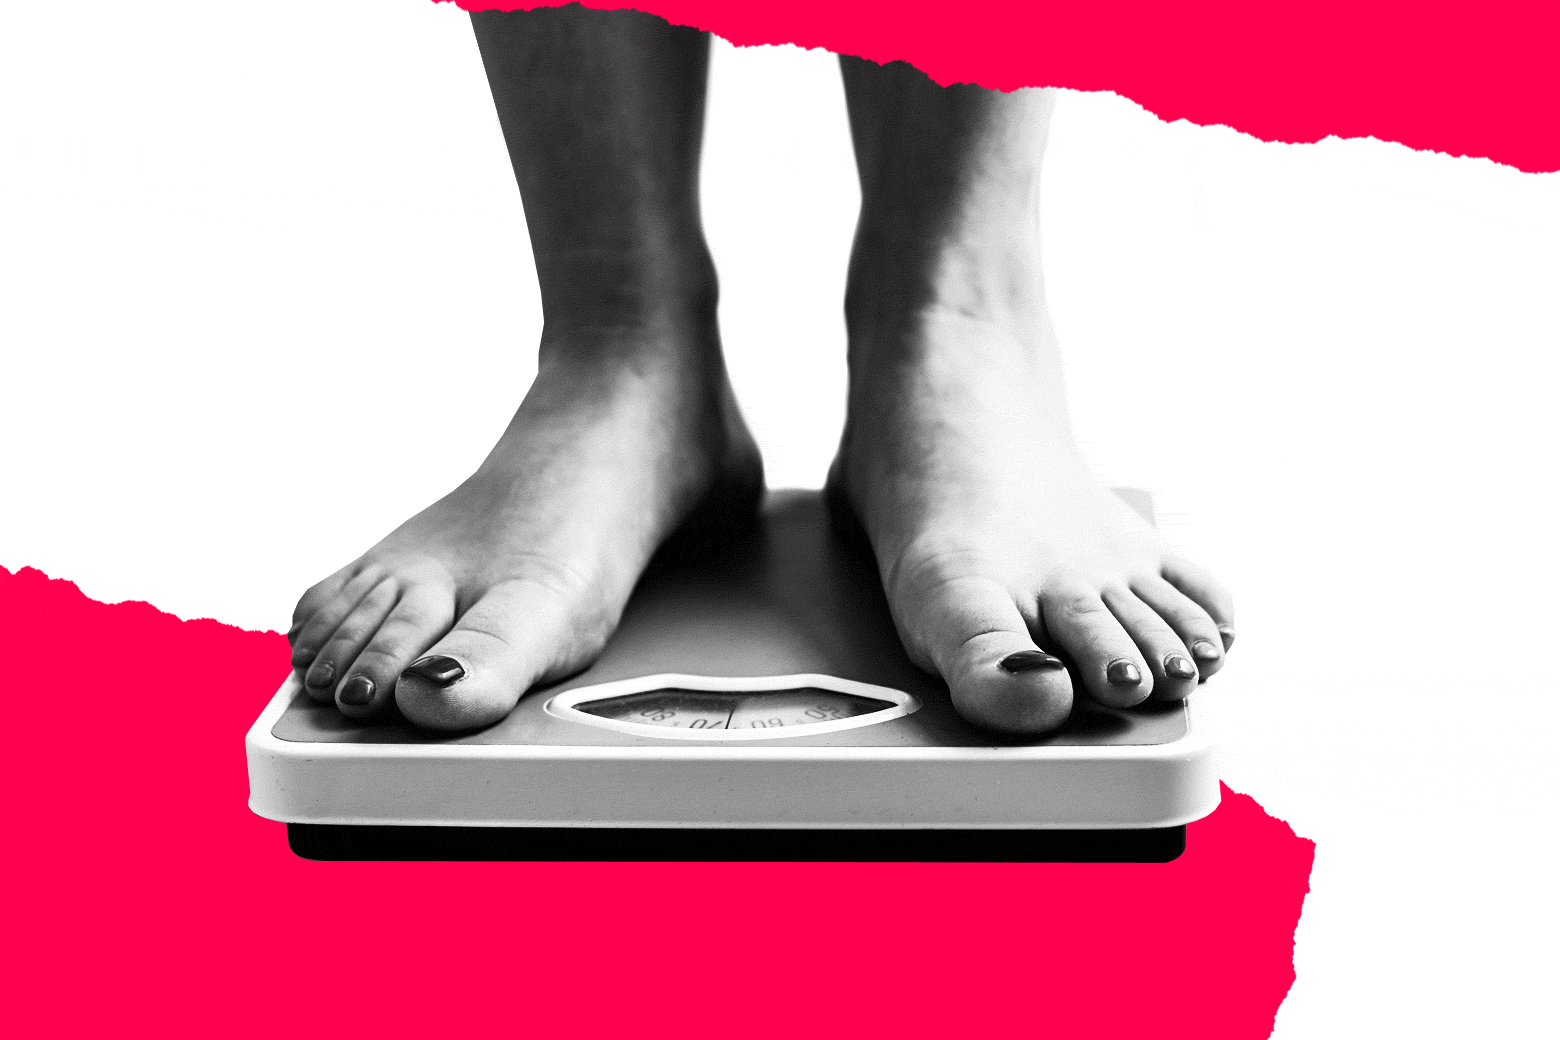 Photo illustration of someone standing on a scale.